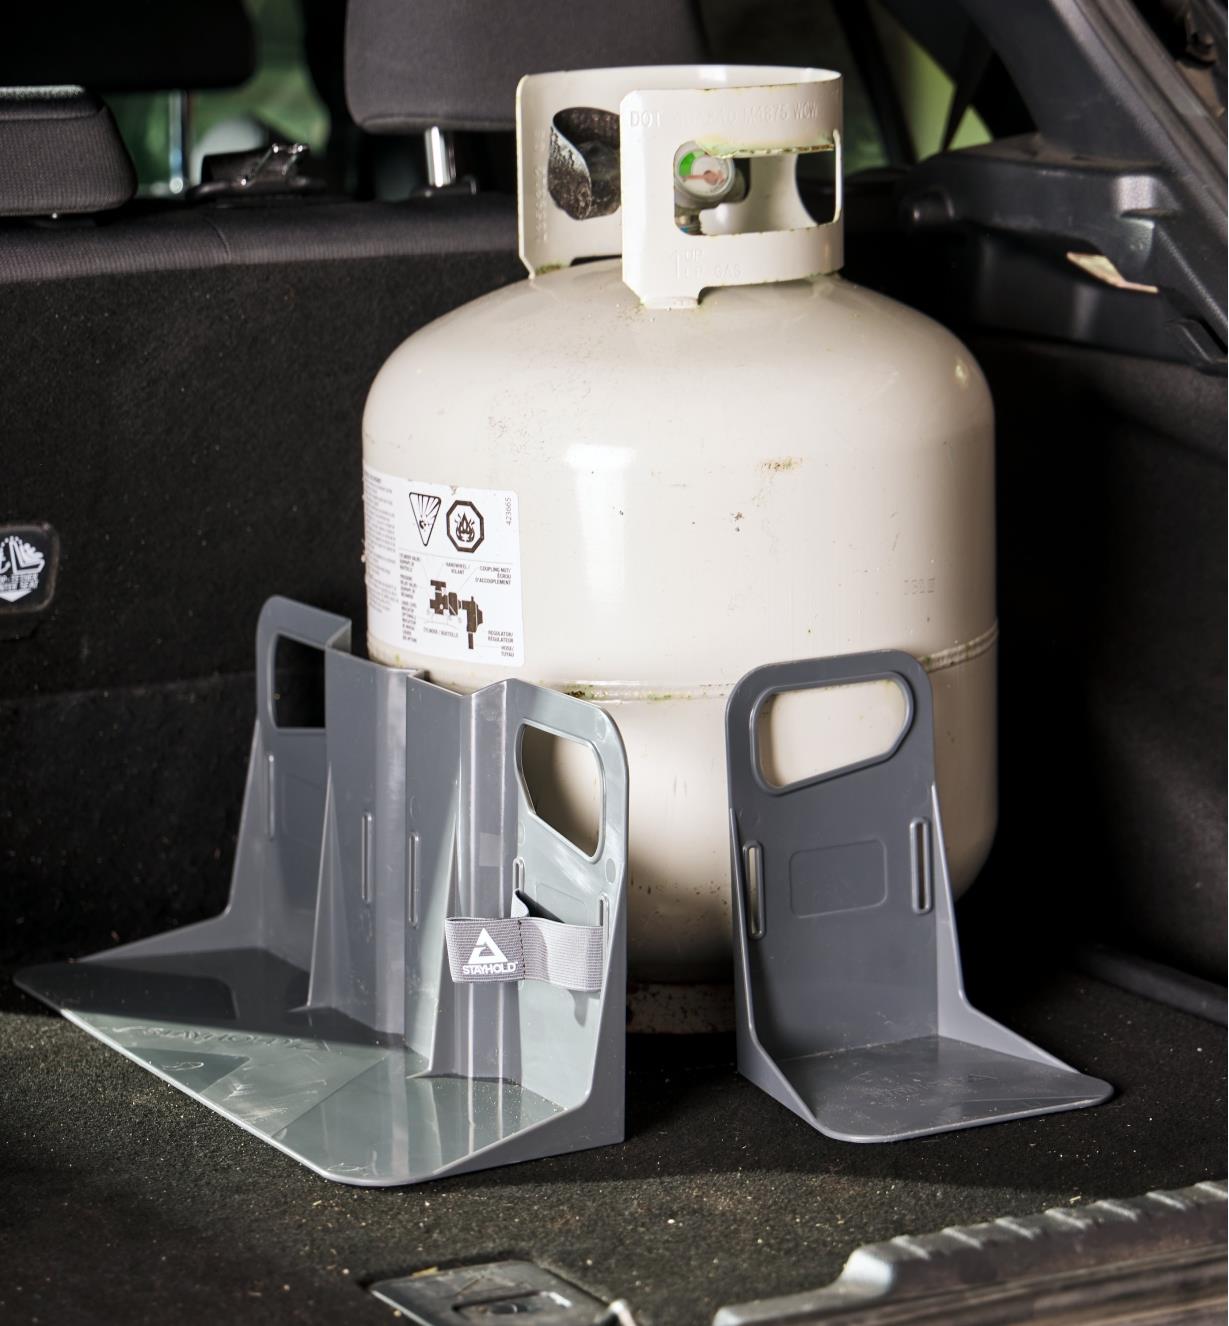 Cargo holder brackets holding a propane tank upright in a car’s cargo area